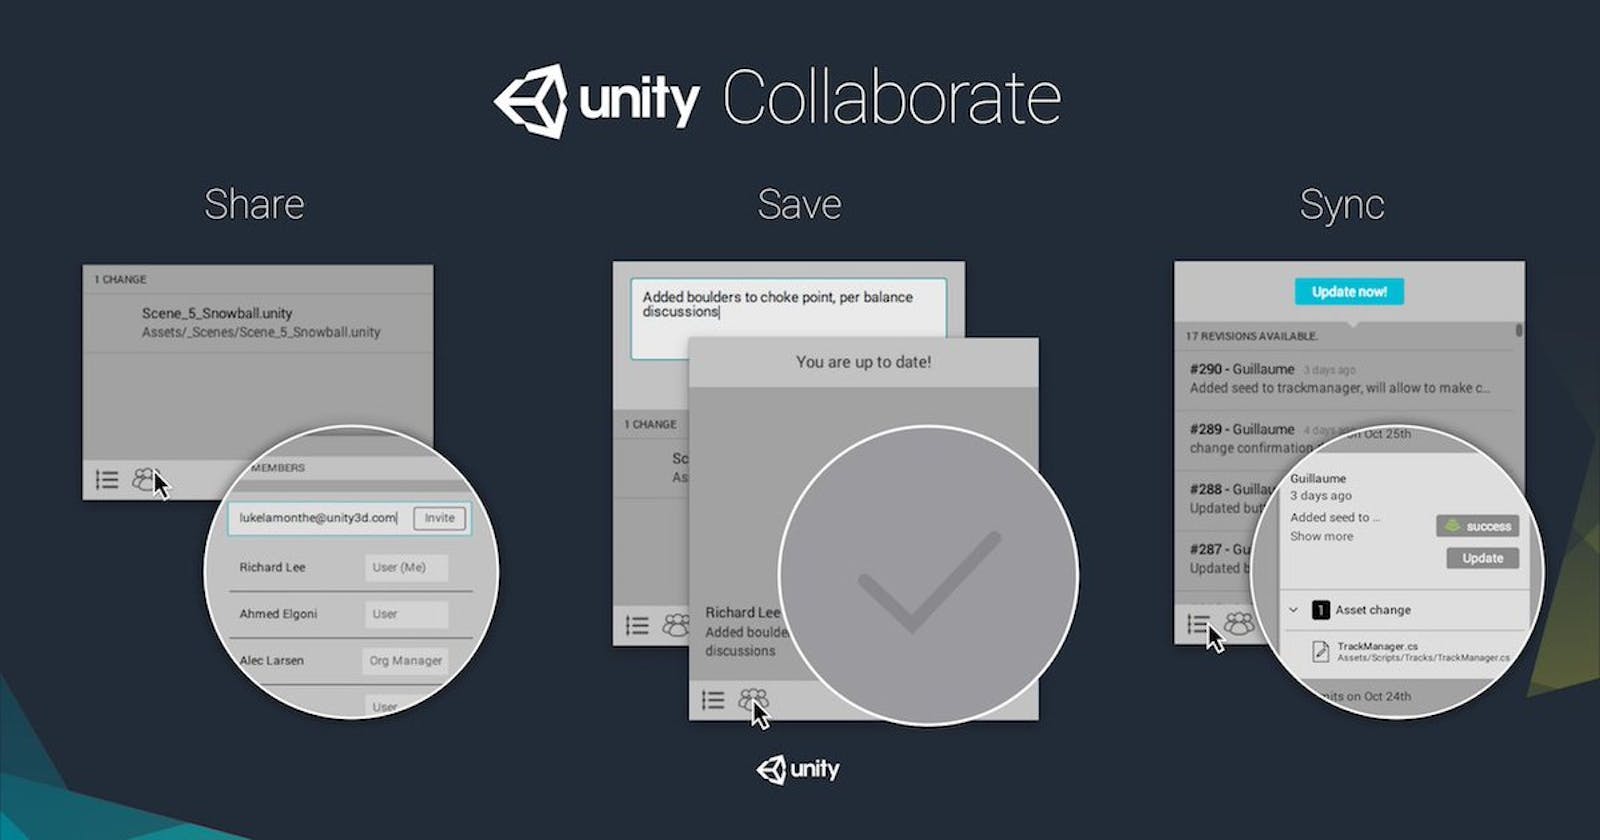 22/7/2021 - Learning Unity Collaborate